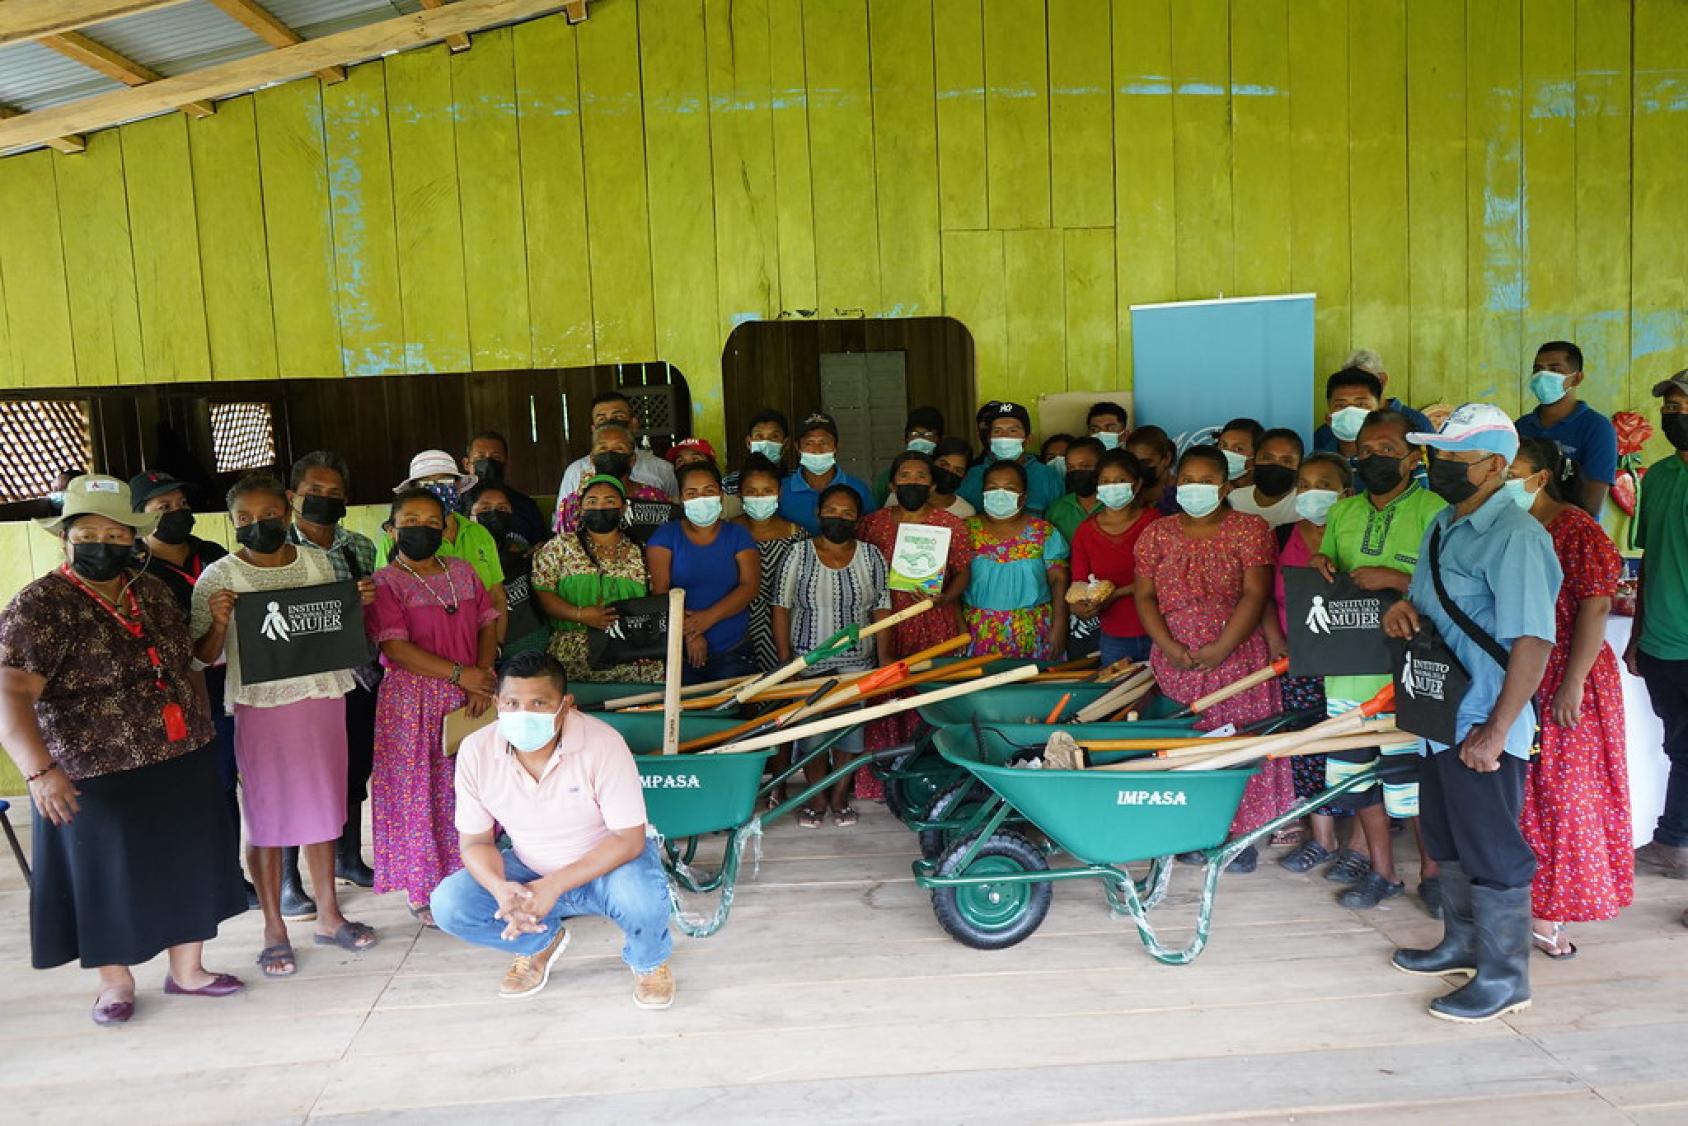 Group picture of Naso Tjër Di women and men wearing face masks and some of them are holding wheelbarrows and other farming tools and implements.